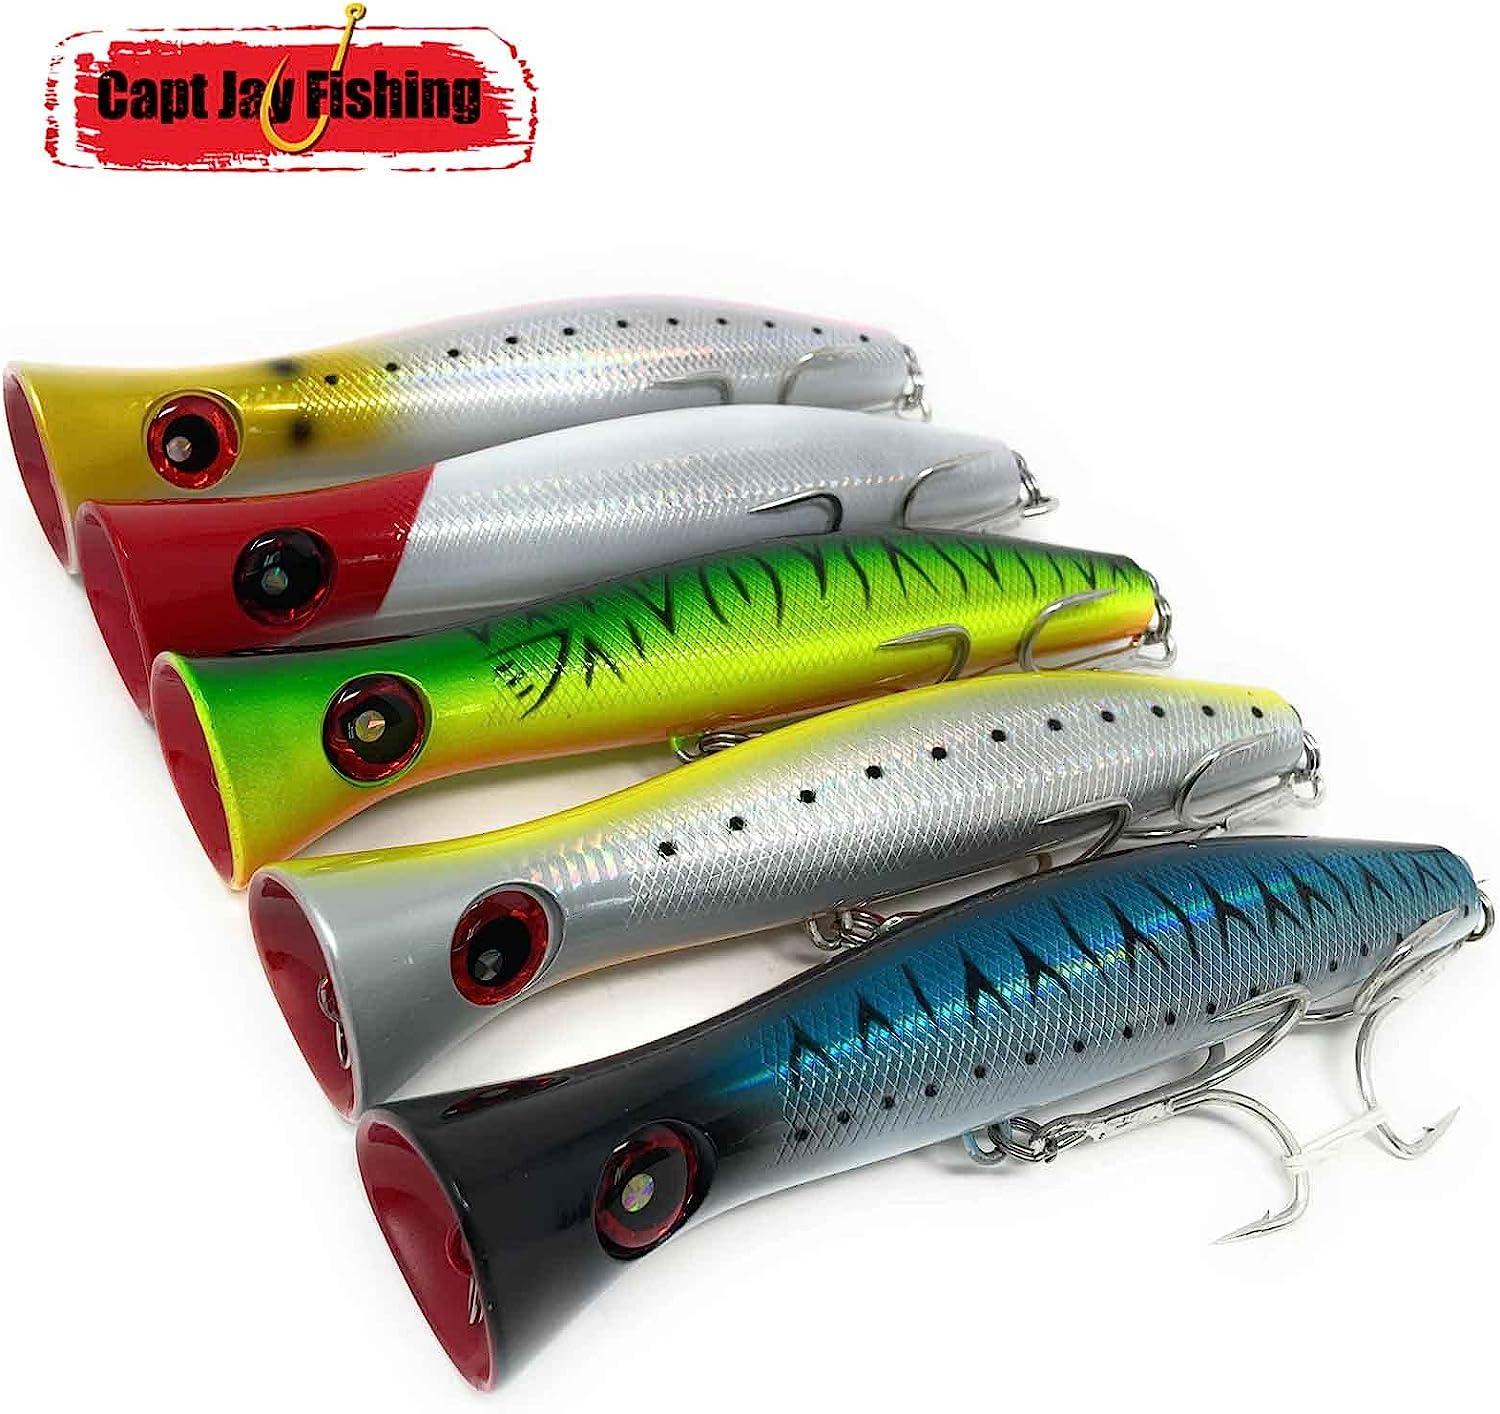 Top Water Popper Fishing Lures Saltwater, Pack of 6 Large Popper Lures  Treble Hooks Surf Fishing Lures for ‎Bass, Tuna, Trout, Striped Bass Popper